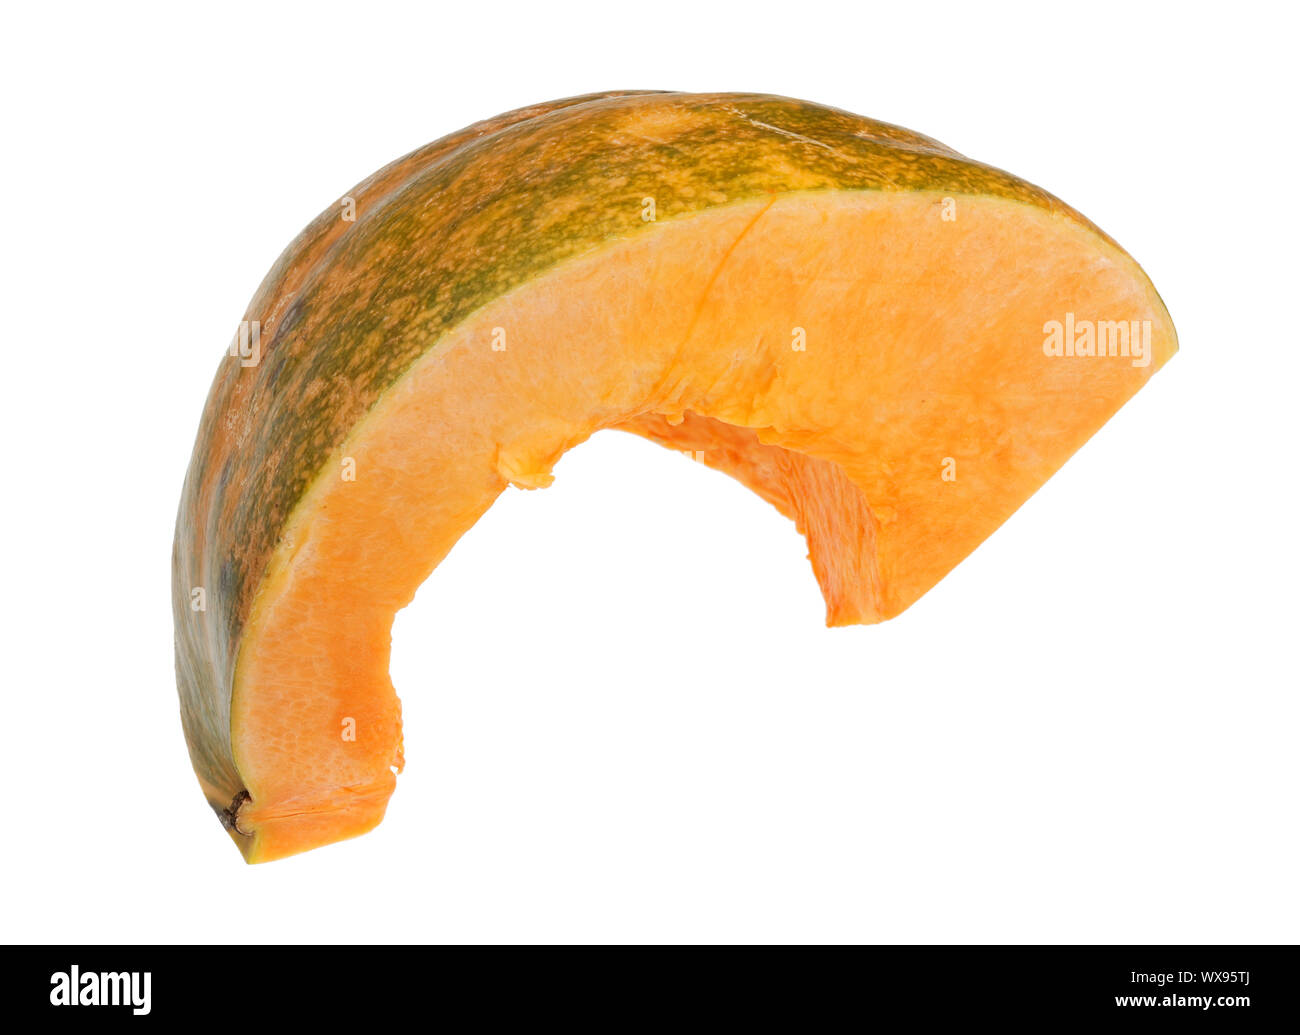 Piece  of ripe orange pumpkin with green skin isolated Stock Photo